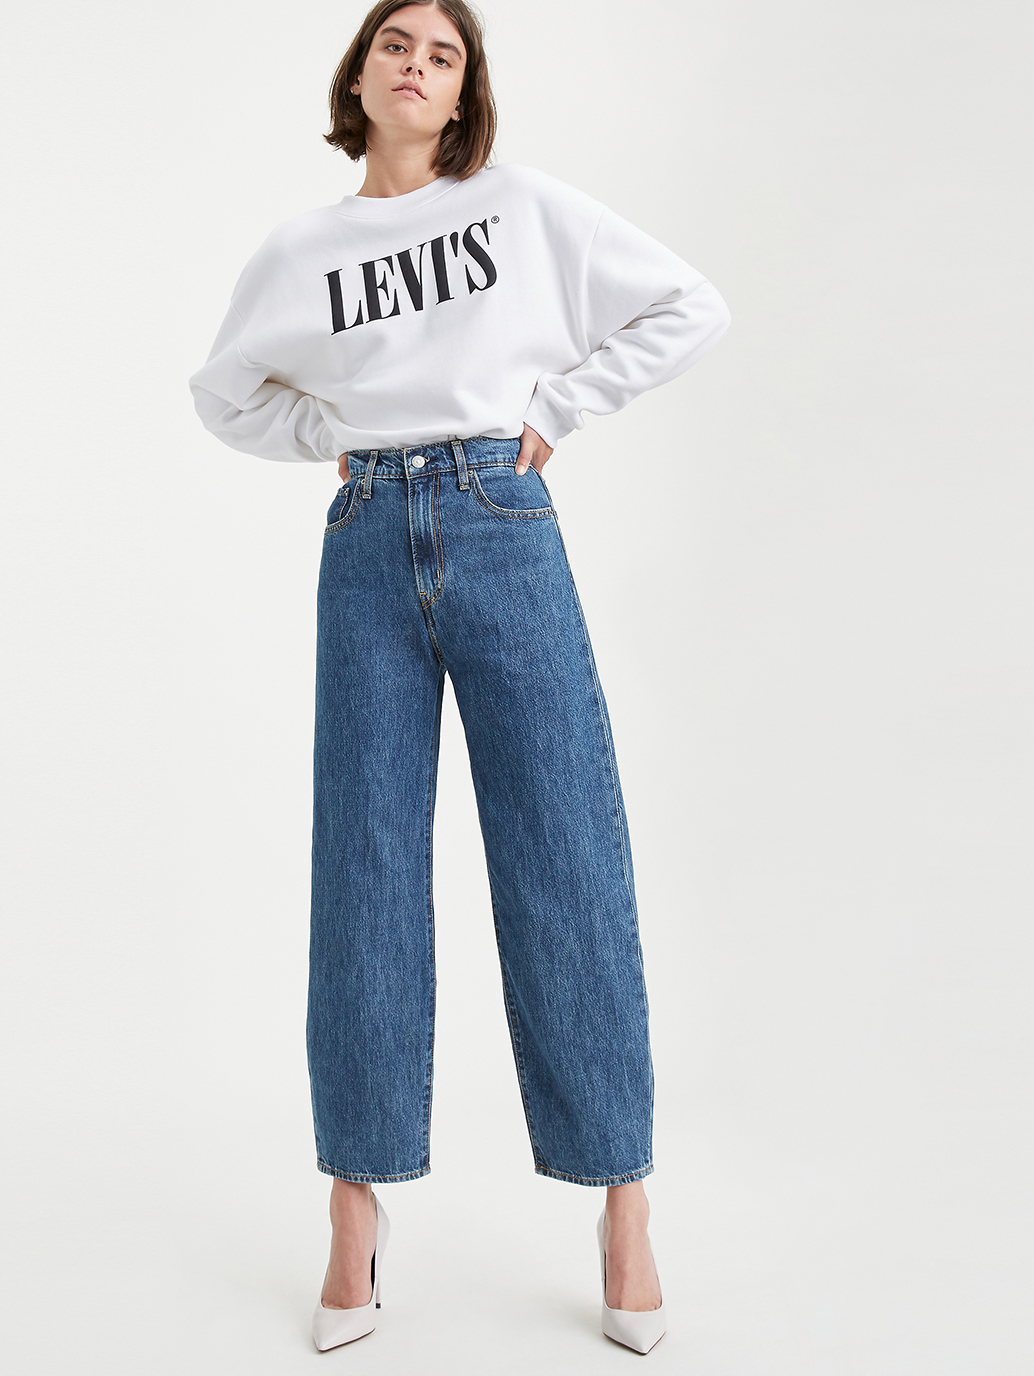 levis high waisted women's jeans